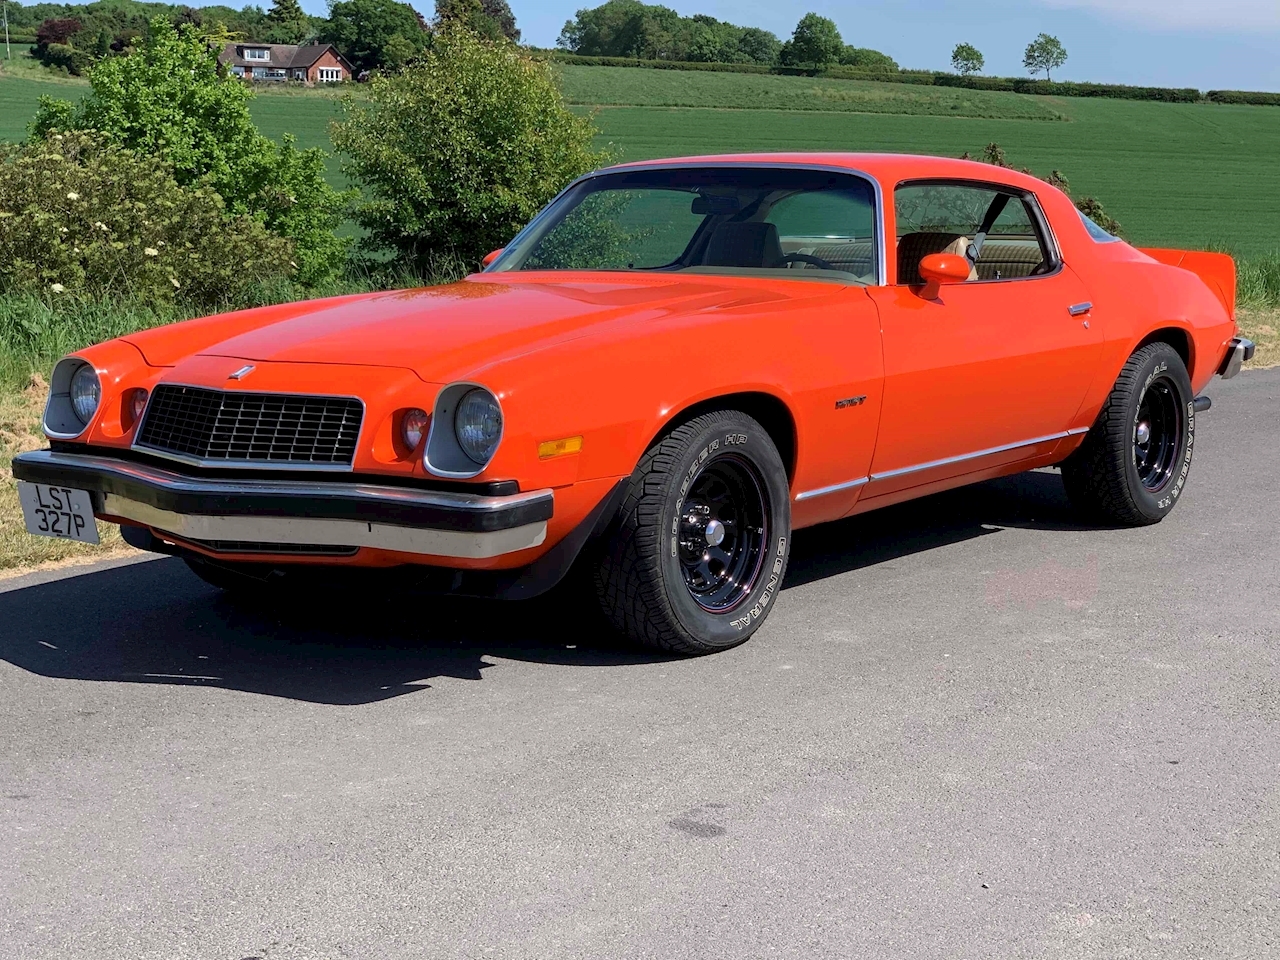 Used 1976 Chevrolet Camaro 350 Lt For Sale U25 Classicwise